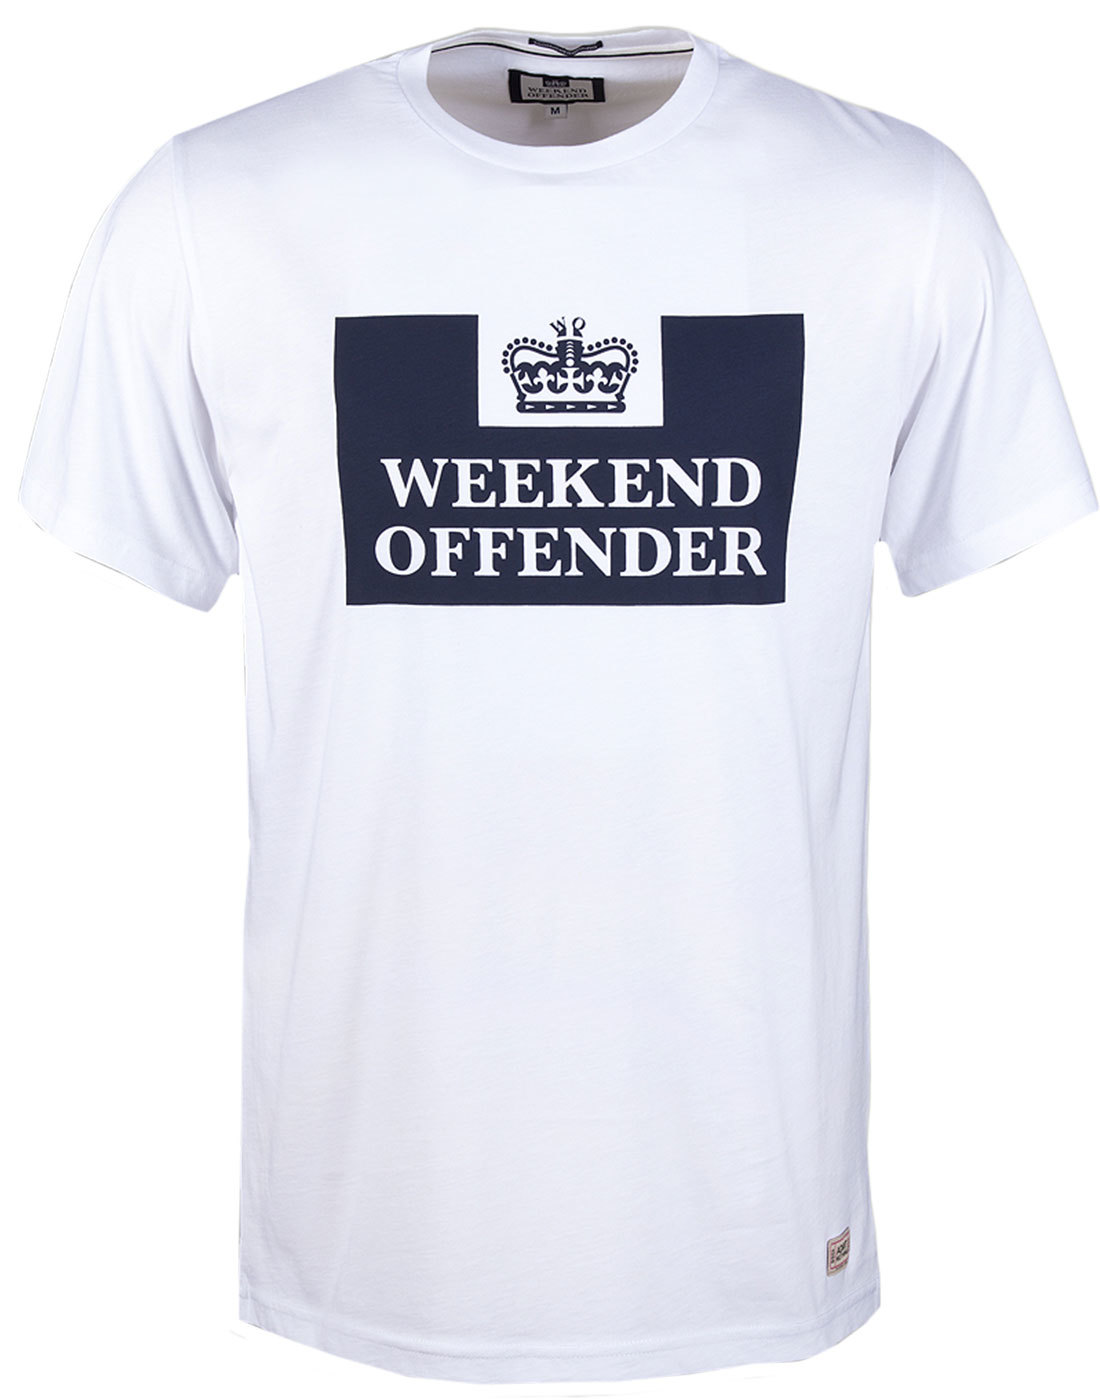 Prison Tee WEEKEND OFFENDER Mod Casuals Tee White